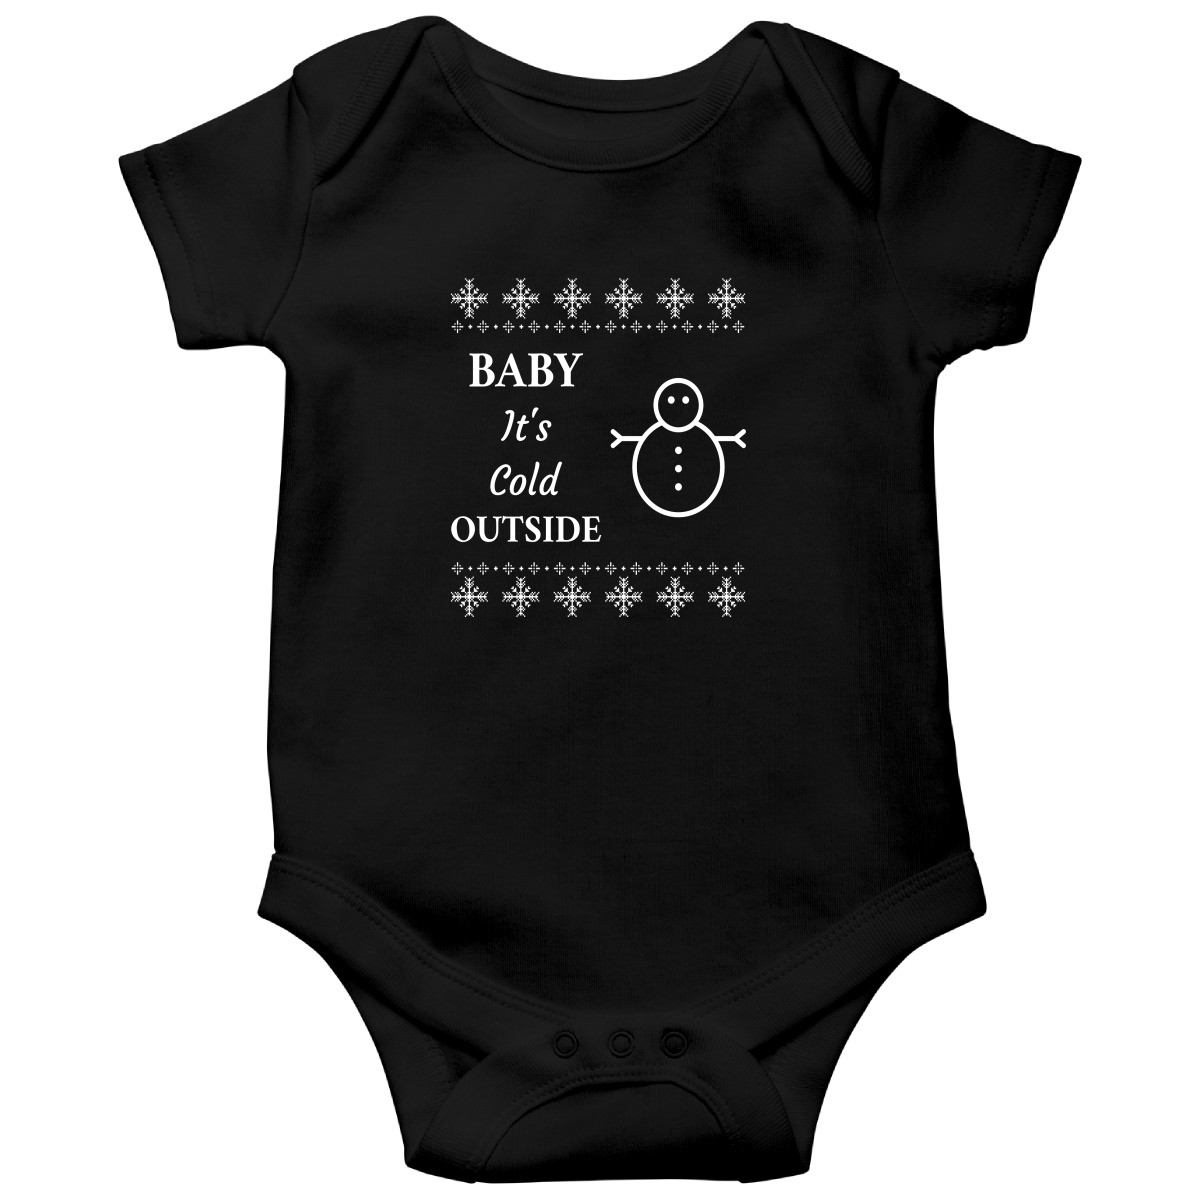 Baby It's Cold Outside Baby Bodysuits